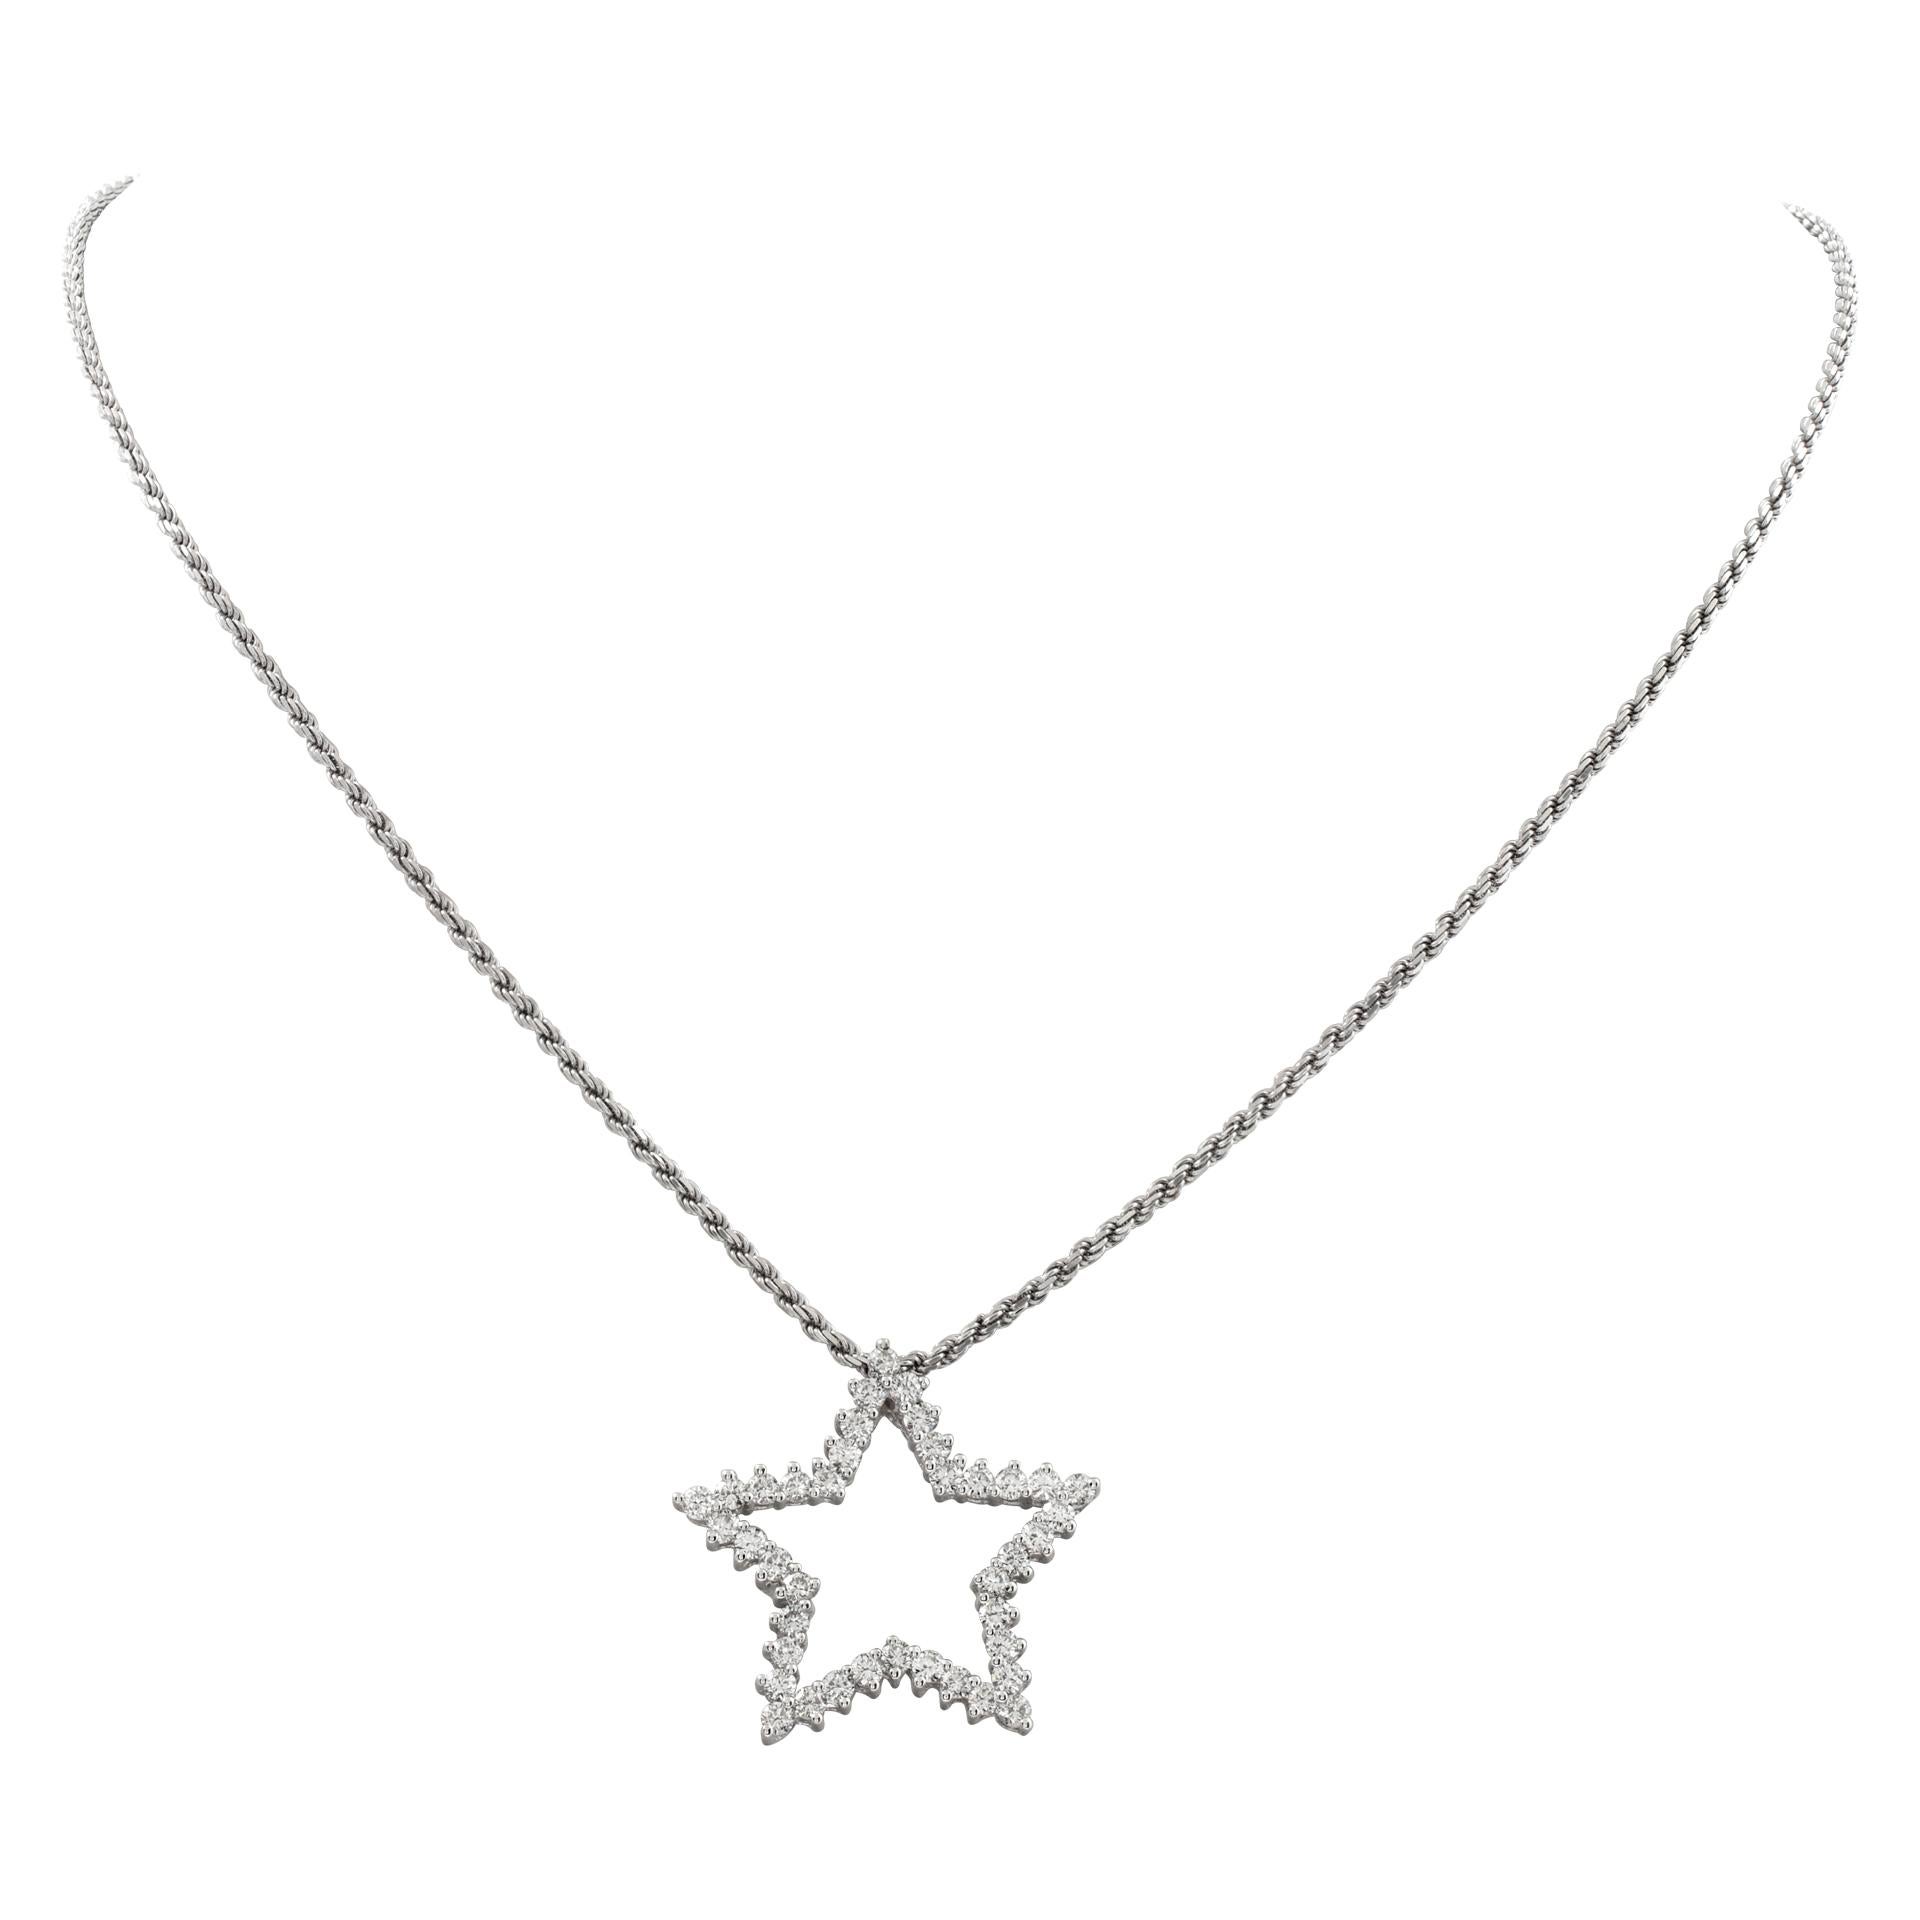 Diamond star pendant in 18k white gold on an 18k white gold chain. Over 1.60 carats in round diamonds (G-H color, VS-SI clarity). 1 inch width star pendant. 16 inch length chain.